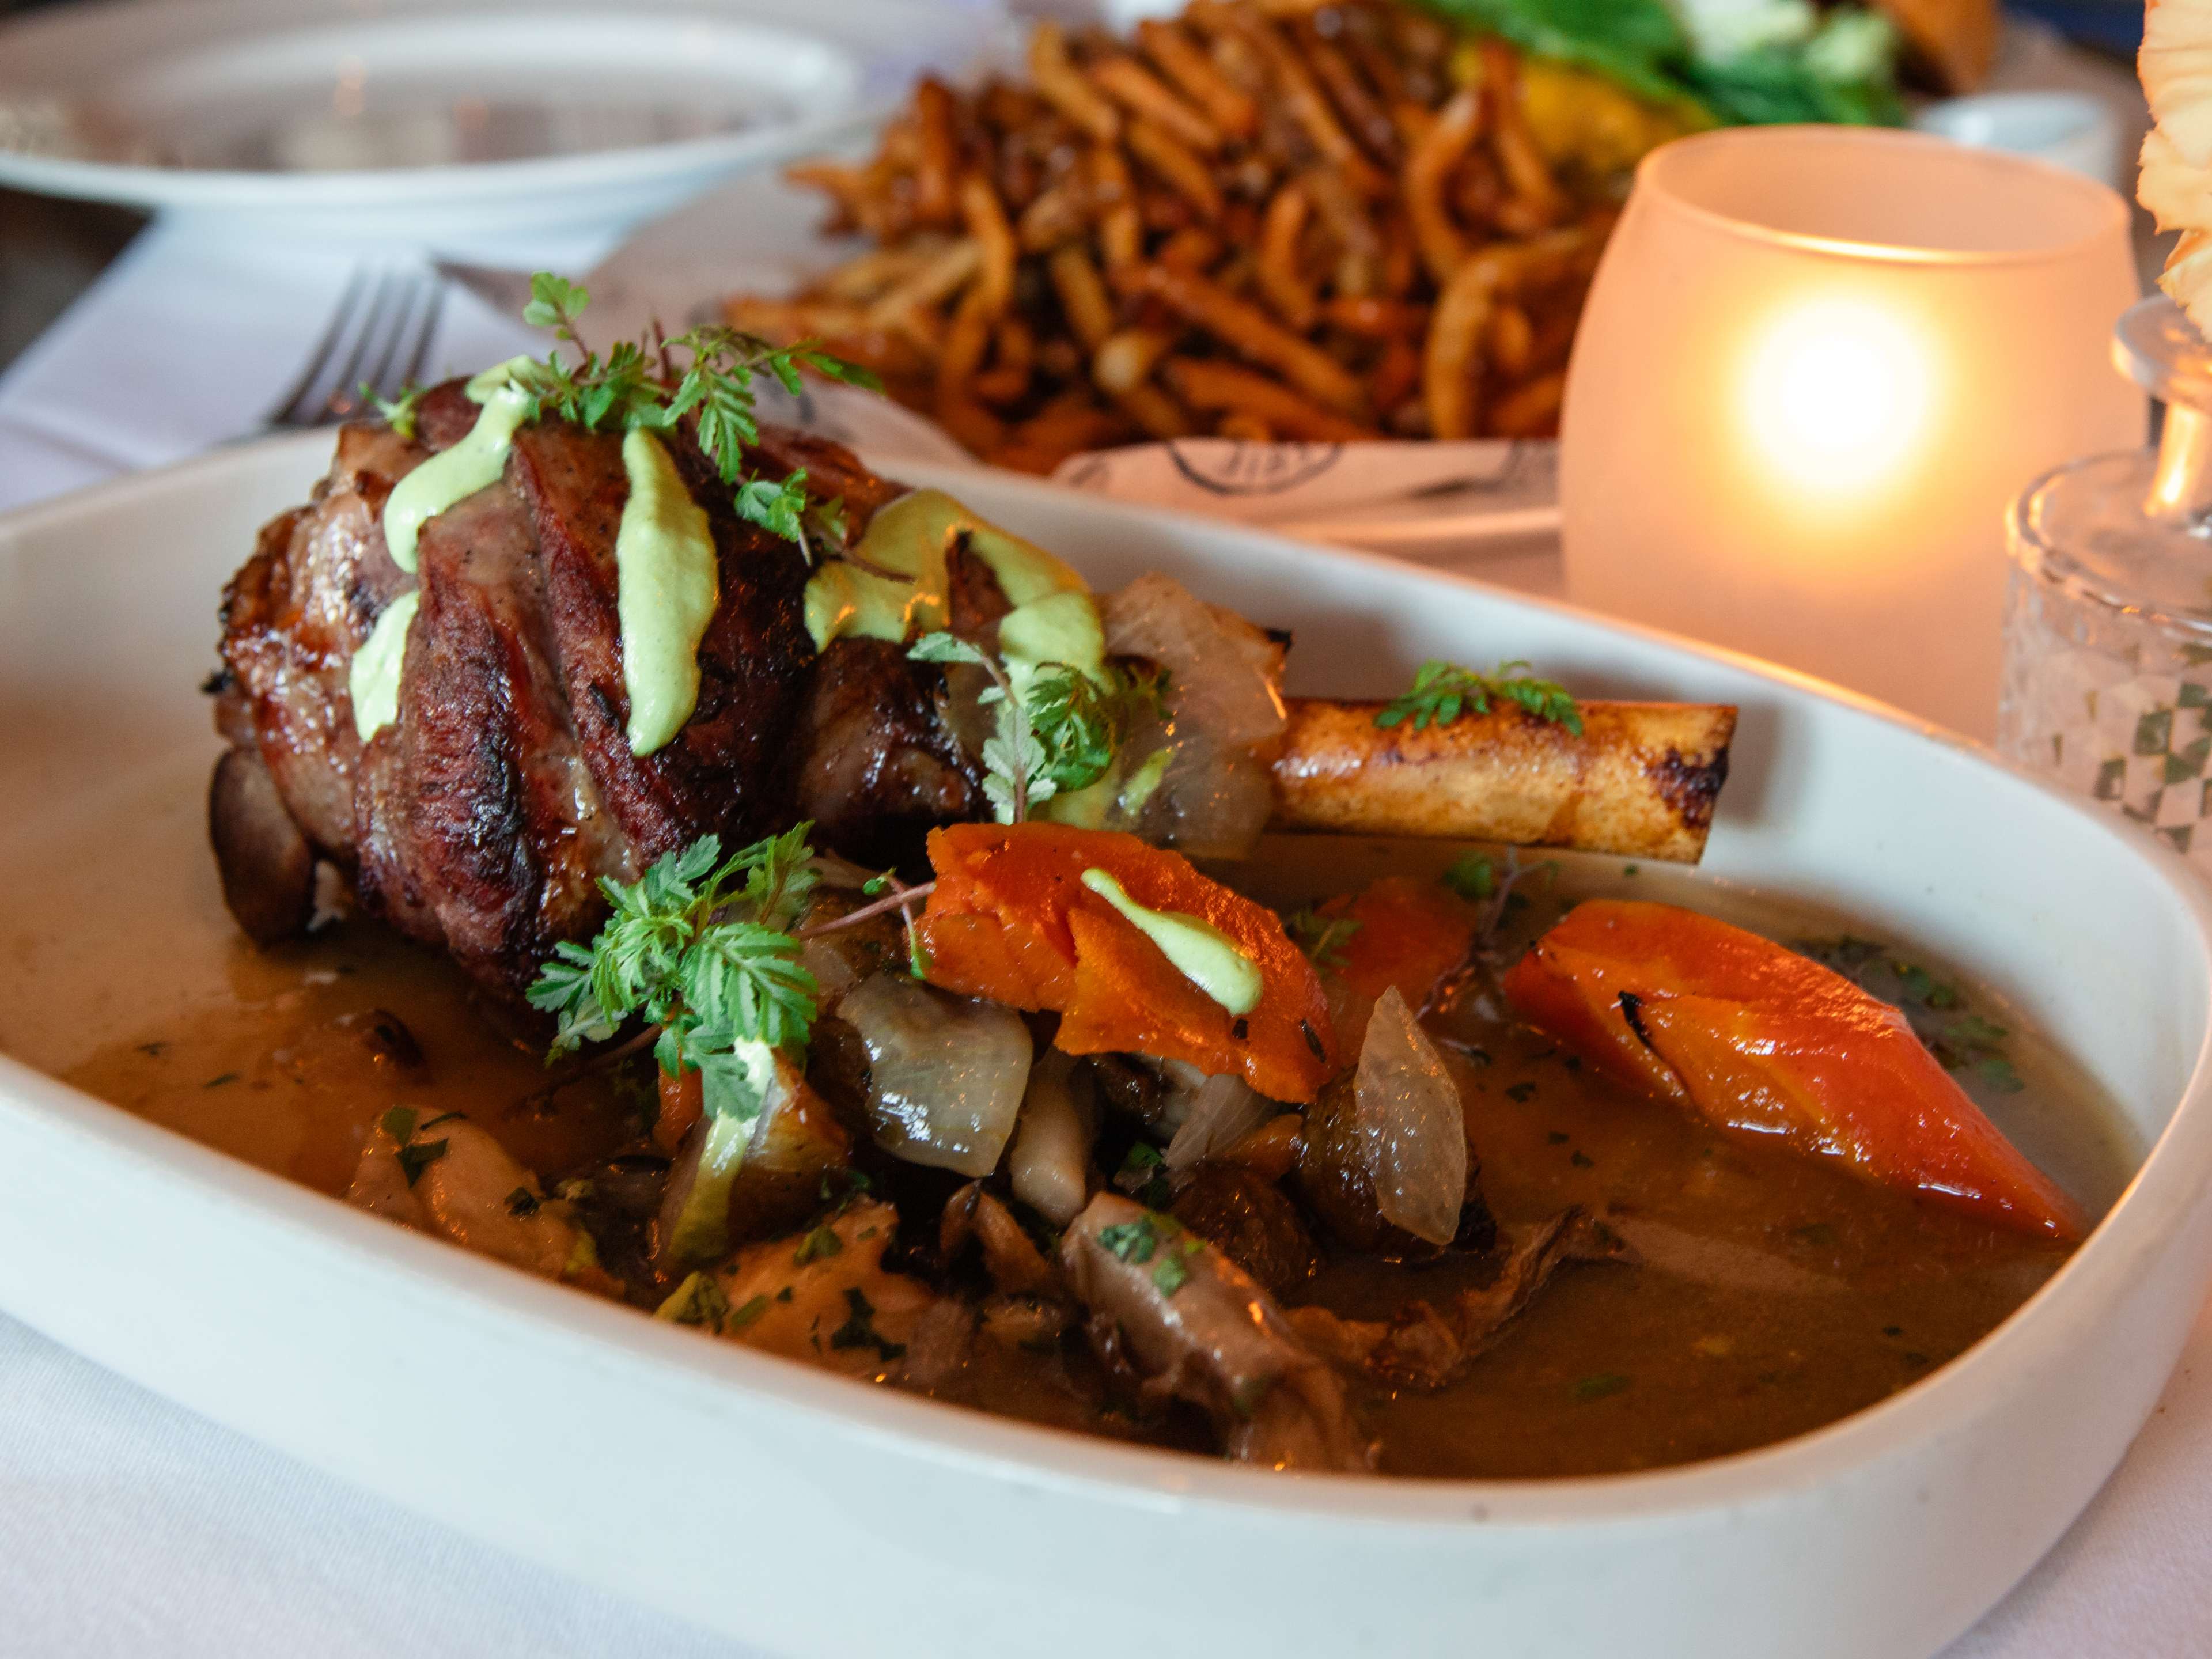 large roasted leg of lamb surrounded by roast carrots and topped with a drizzle of green sauce